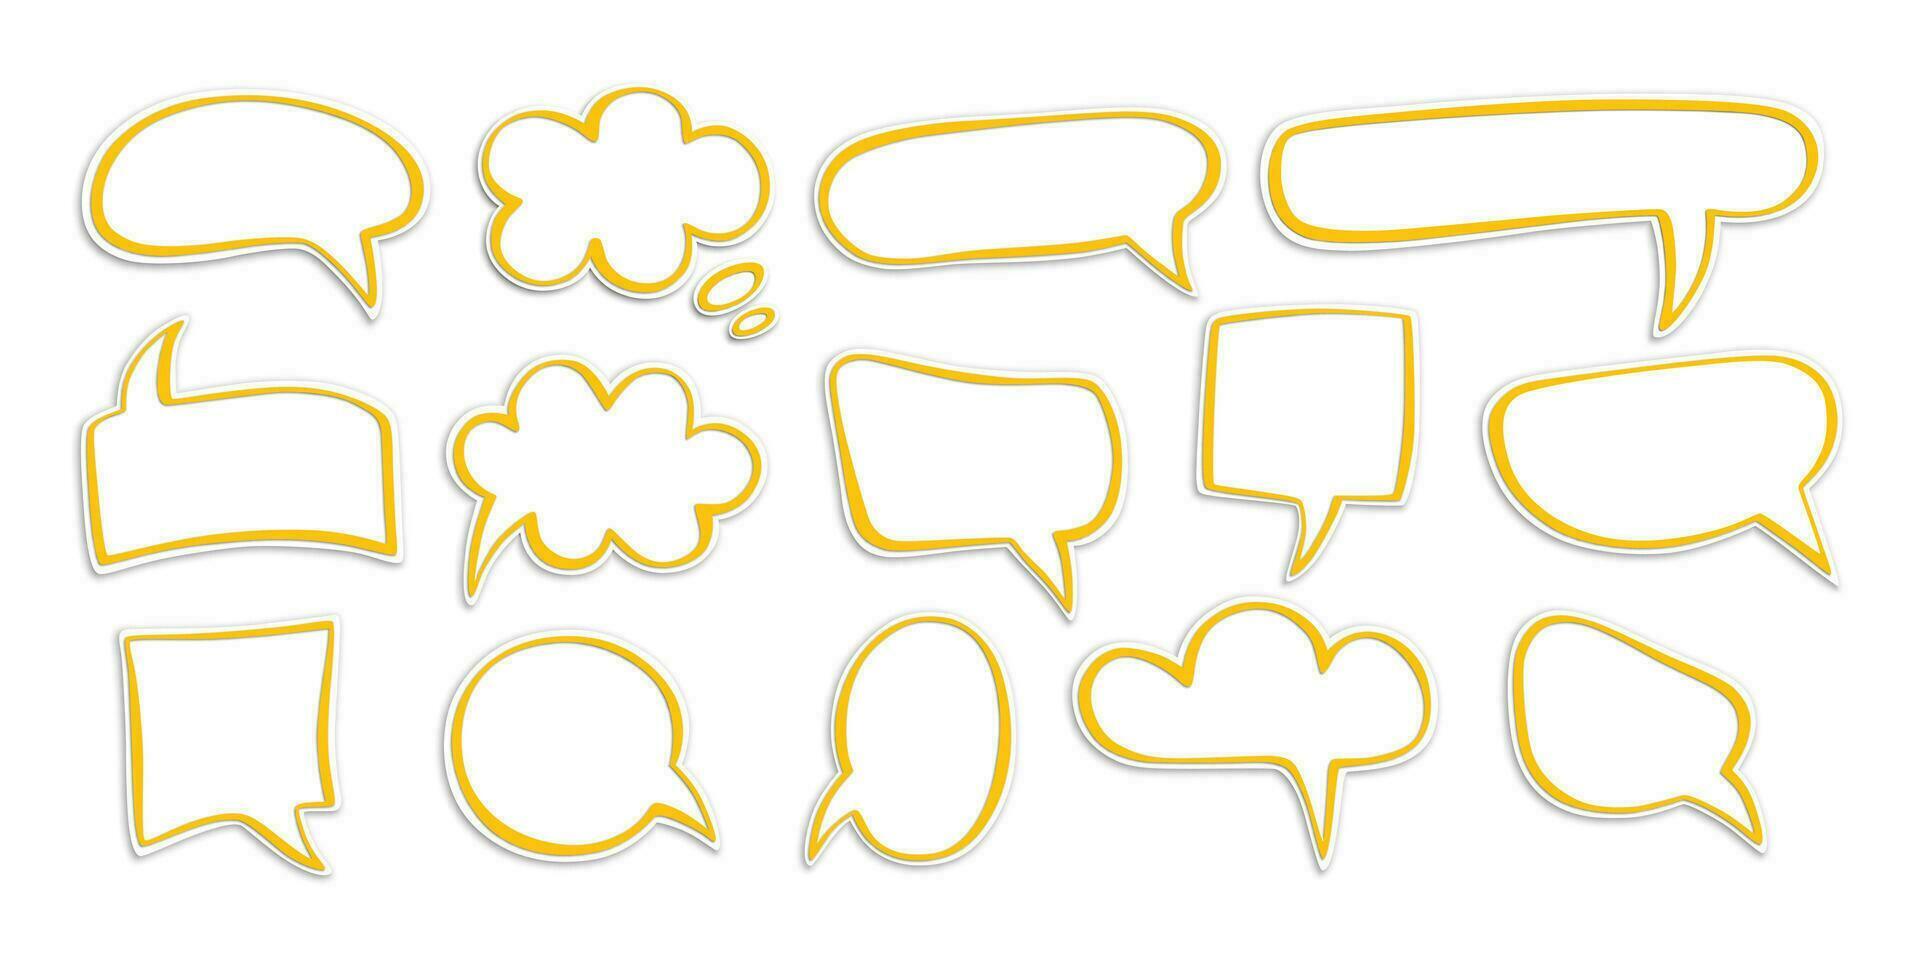 Set of speech bubble, textbox cloud of chat for comment, post, comic. Dialog box icon, message template. Different shape of empty balloons for talk on isolated background vector